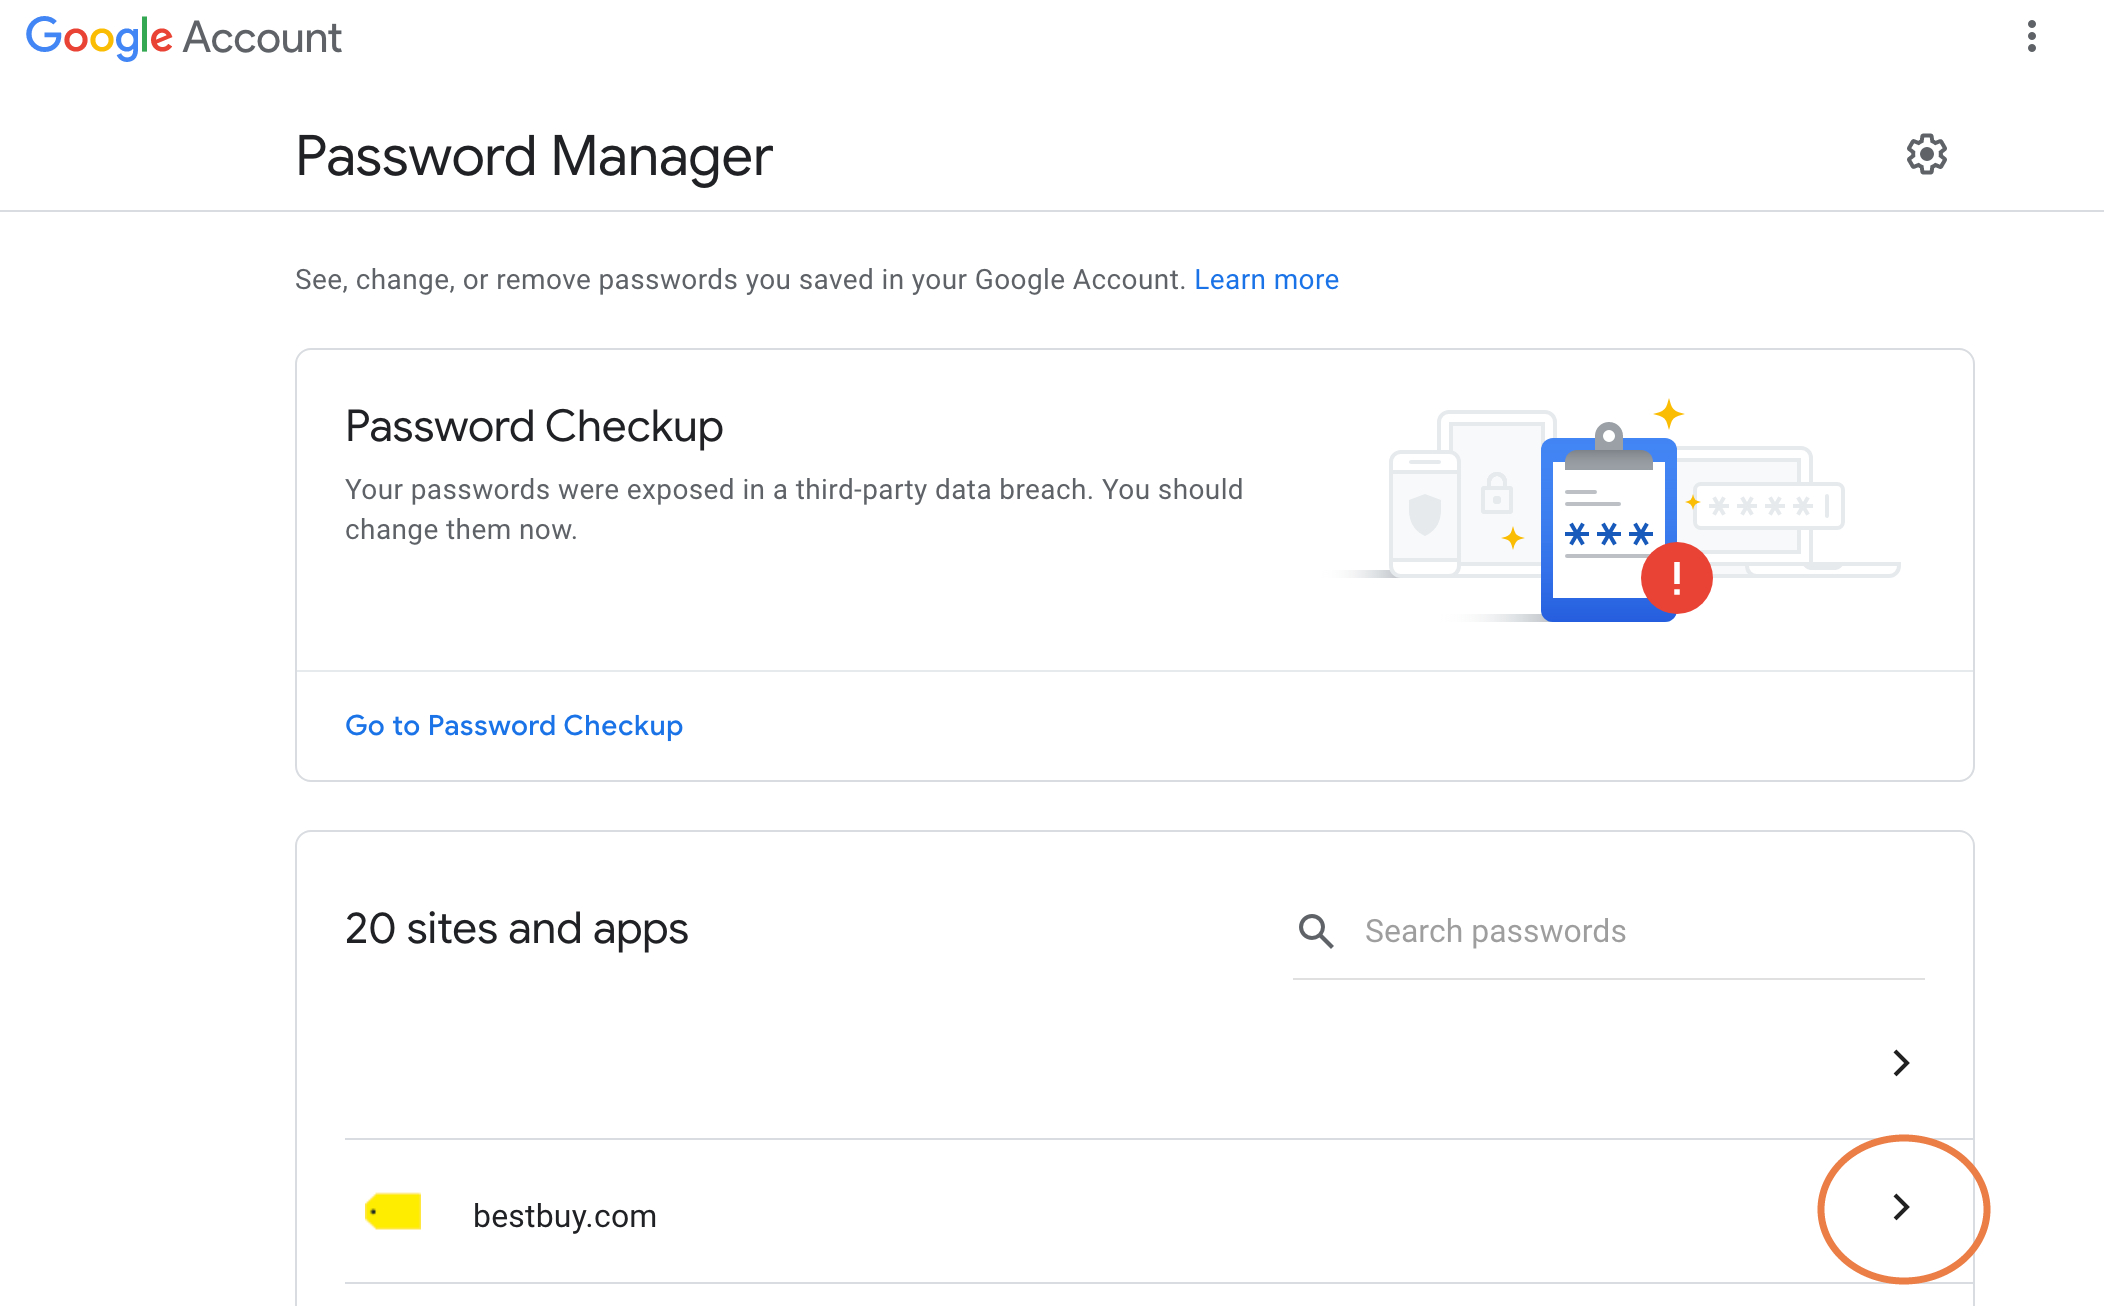 How do I remove an account from Google Smart Lock?